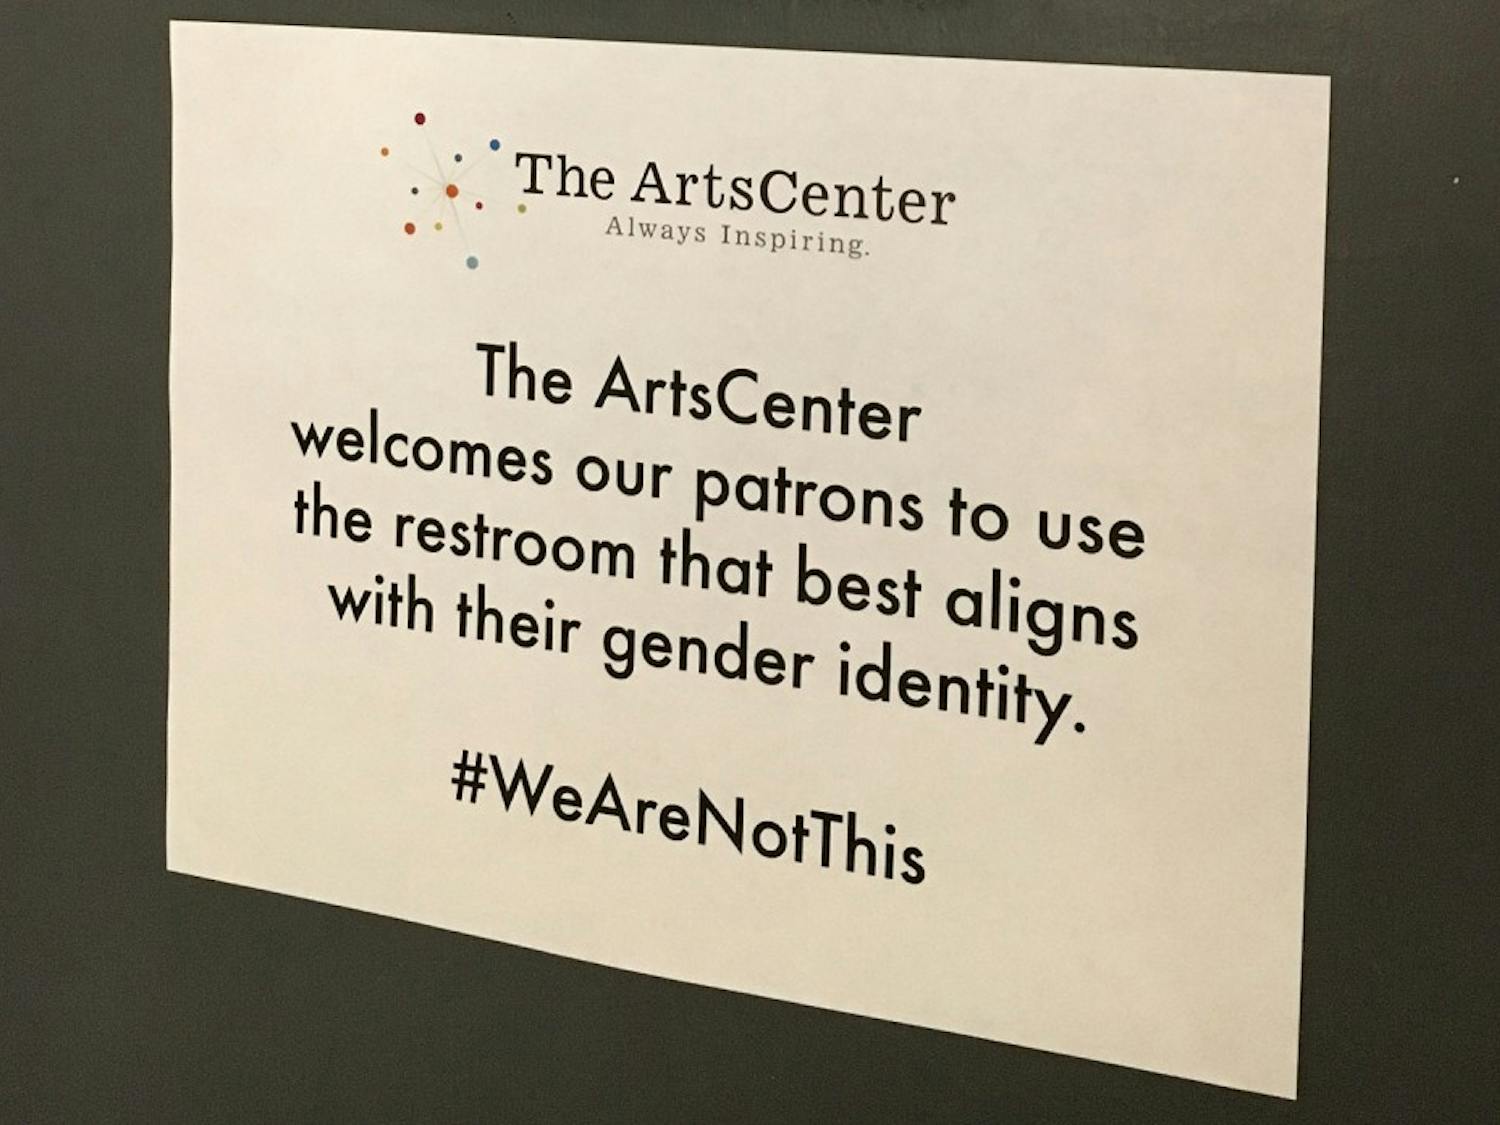 The ArtsCenter hangs signs in the bathrooms stating “#WeAreNotThis” in opposition to H.B. 2&nbsp;(courtesy of&nbsp;Patrick Phelps-Mckeown).